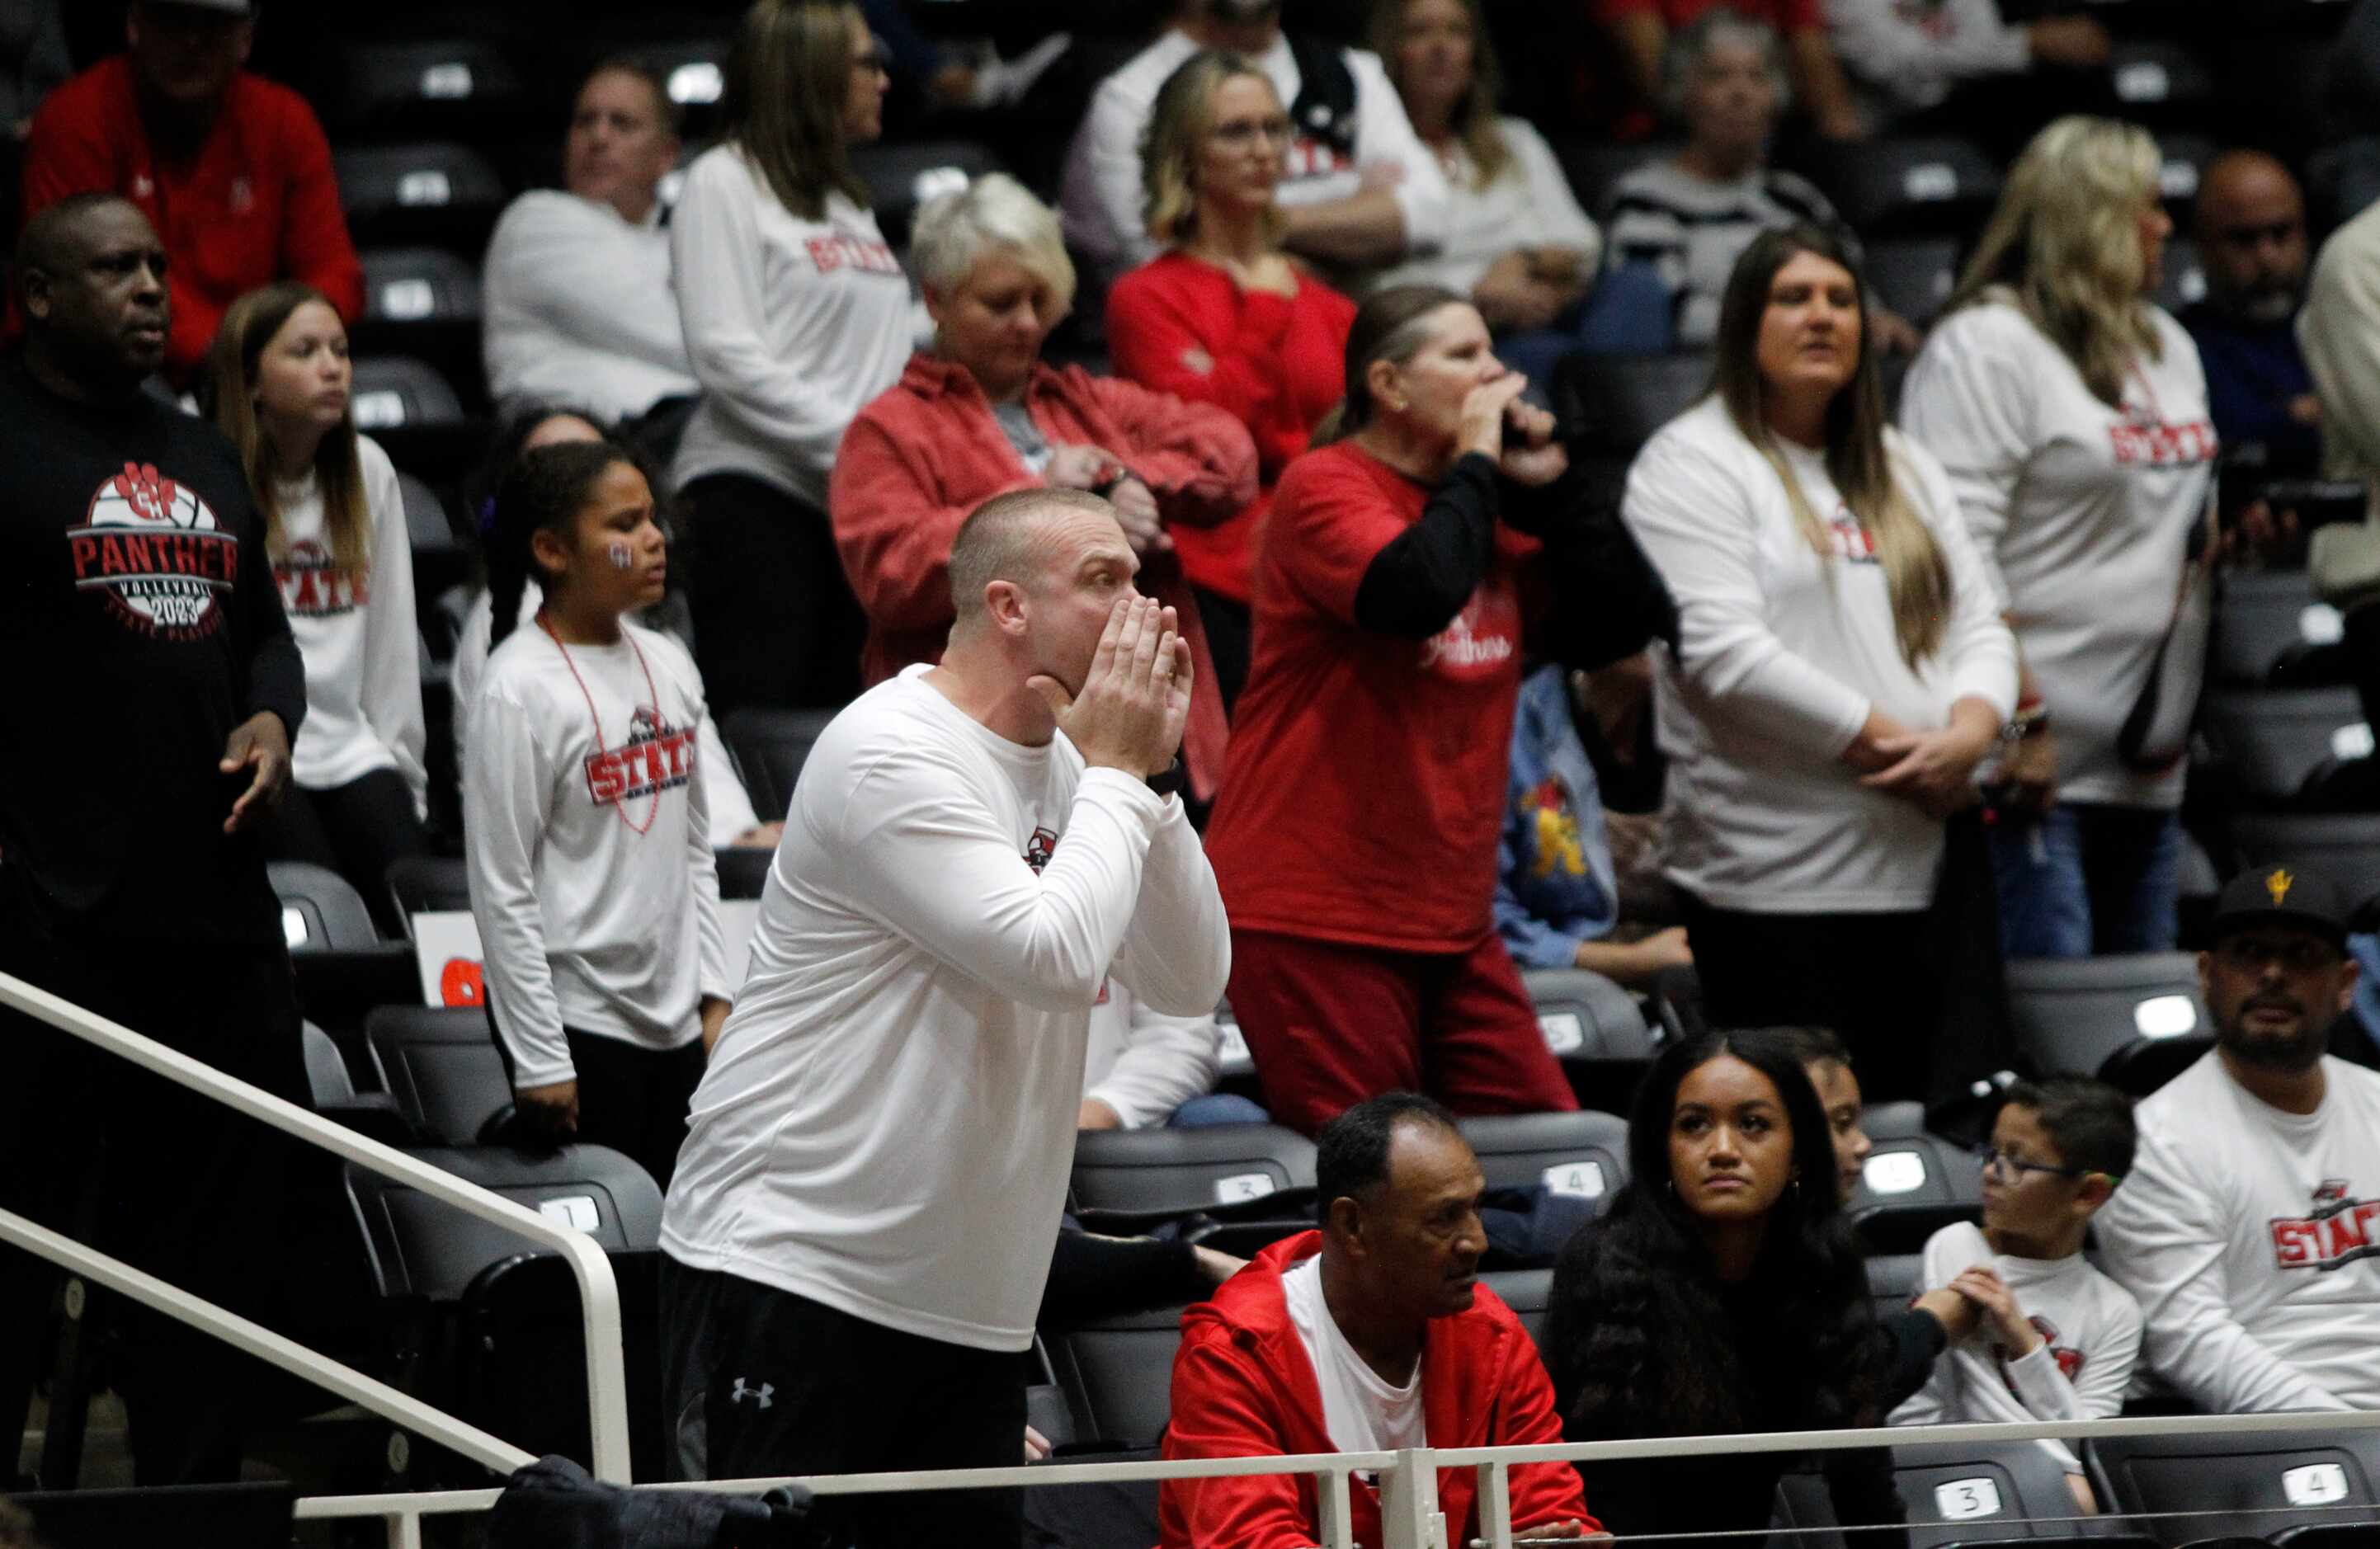 Colleyville Heritage fan and dad David Davis, left, voices his support for the team and his...